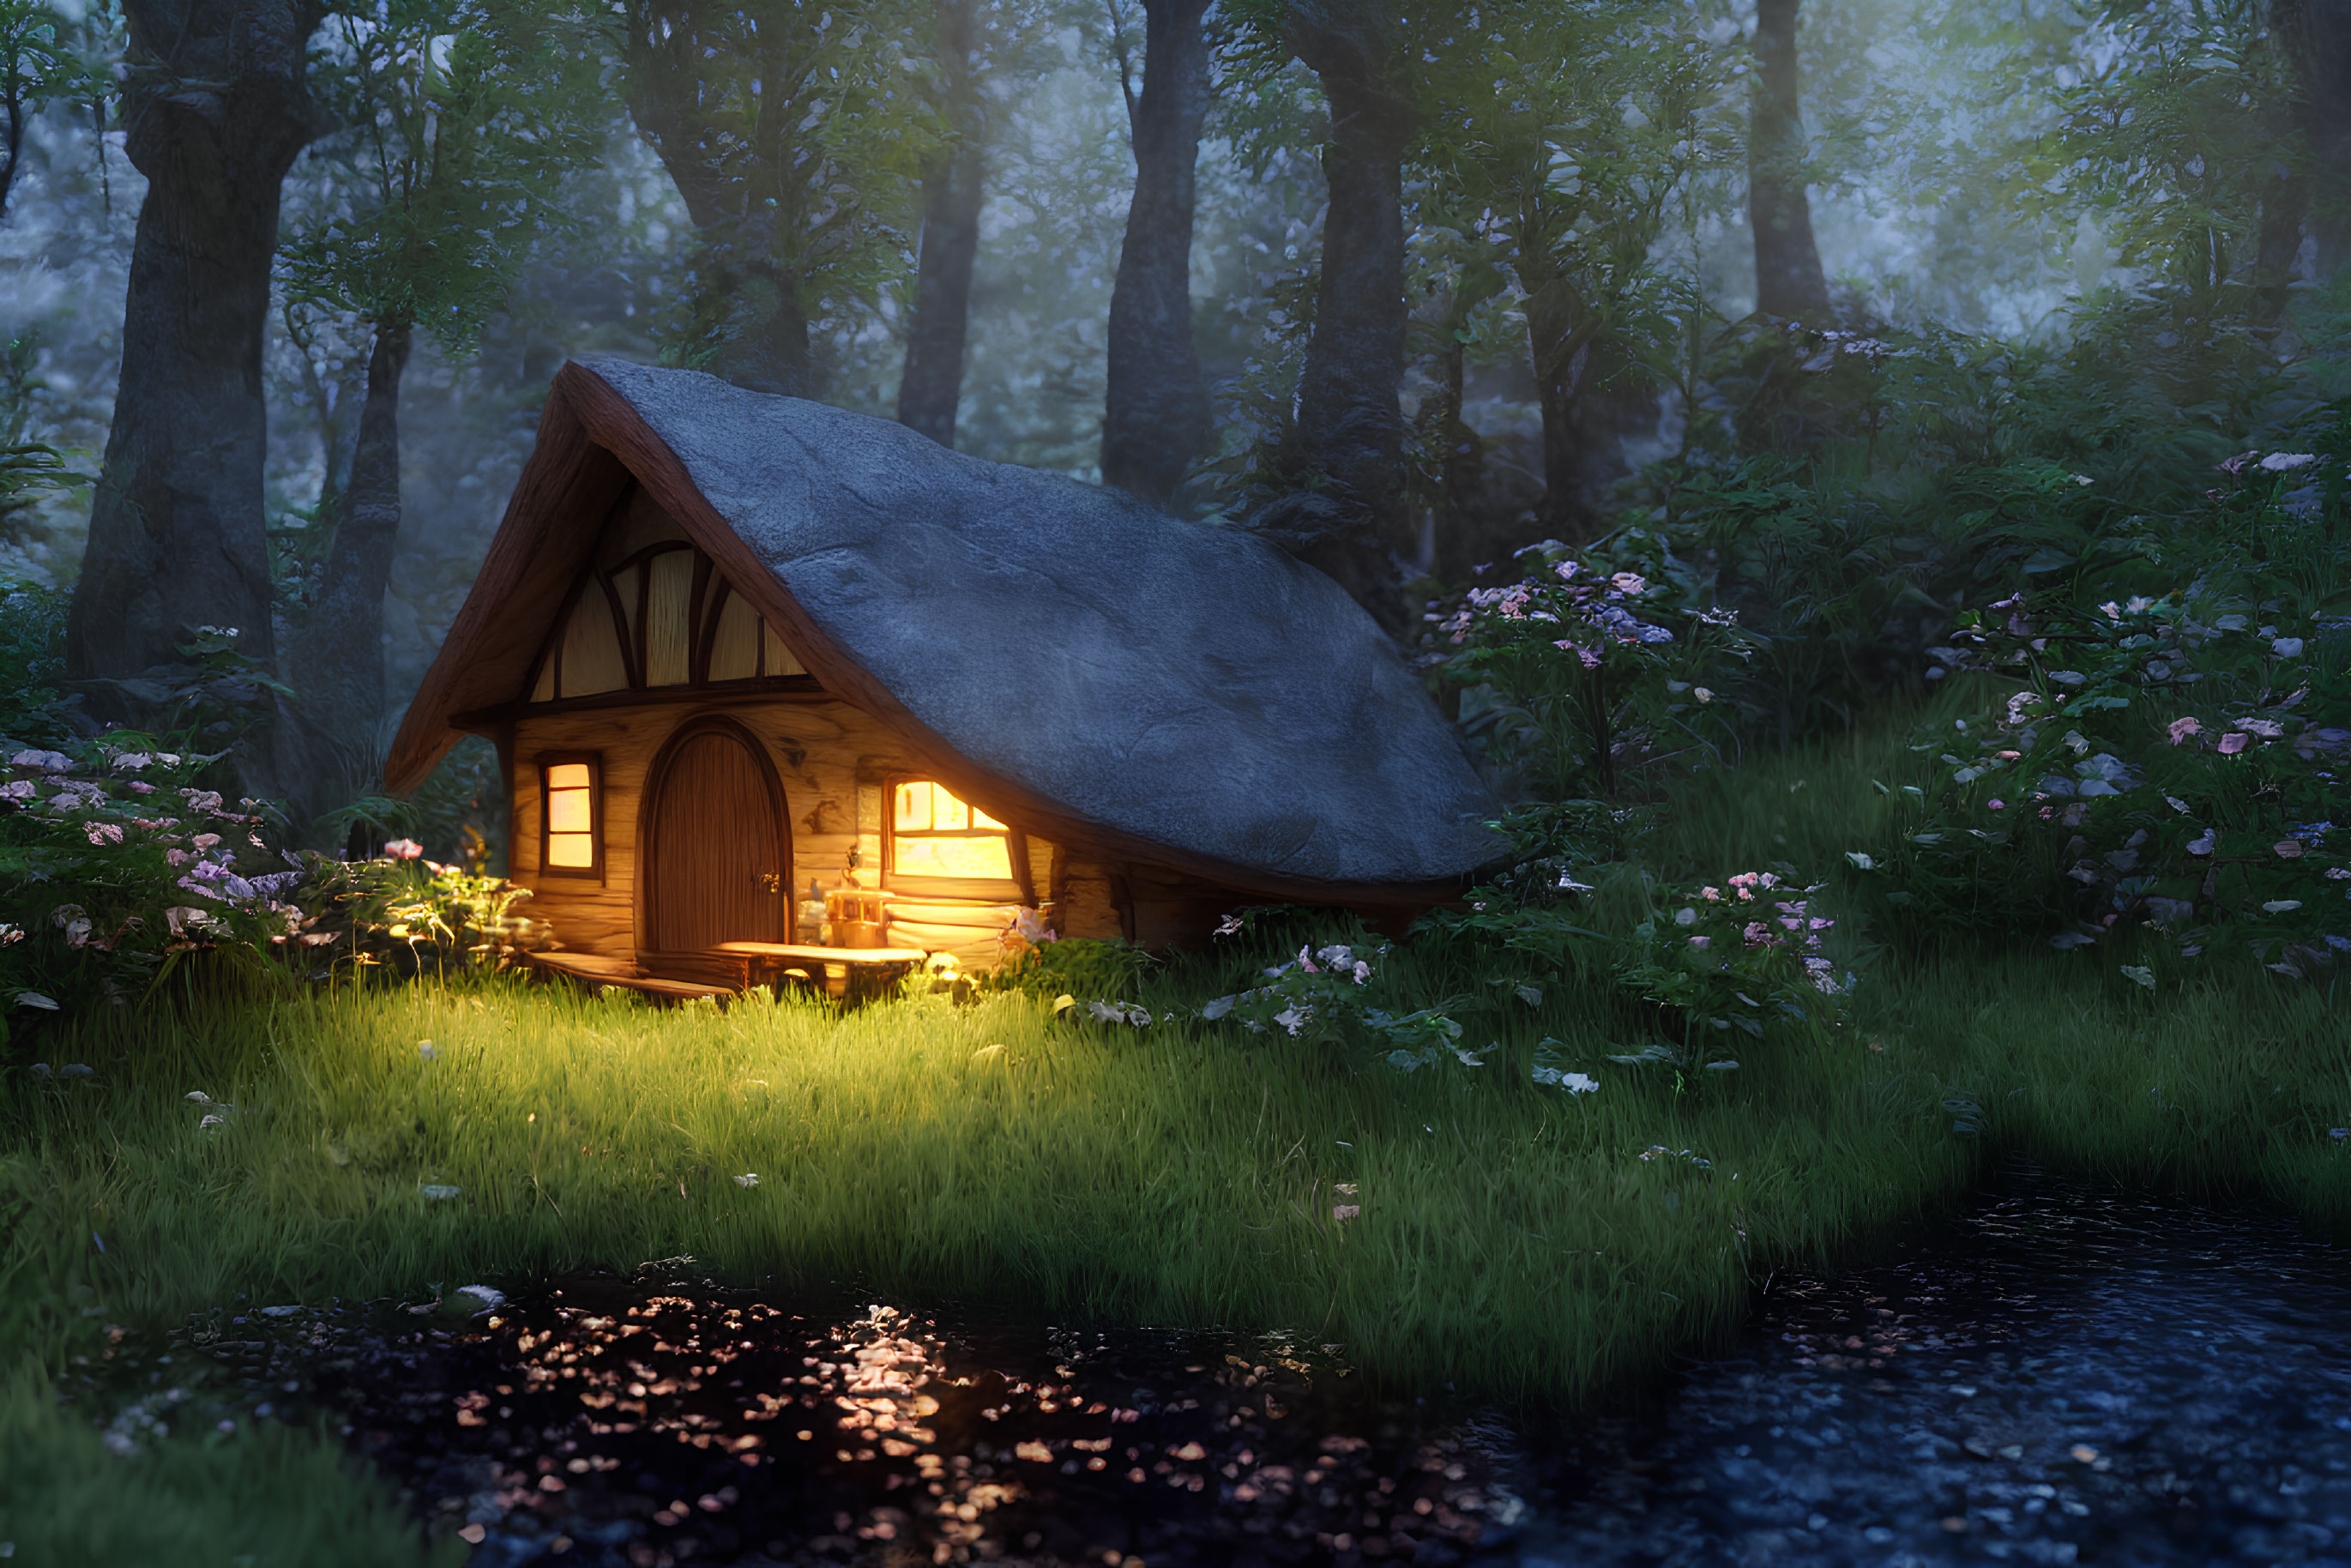 Thatched-Roof Cottage in Flower-Filled Forest at Twilight